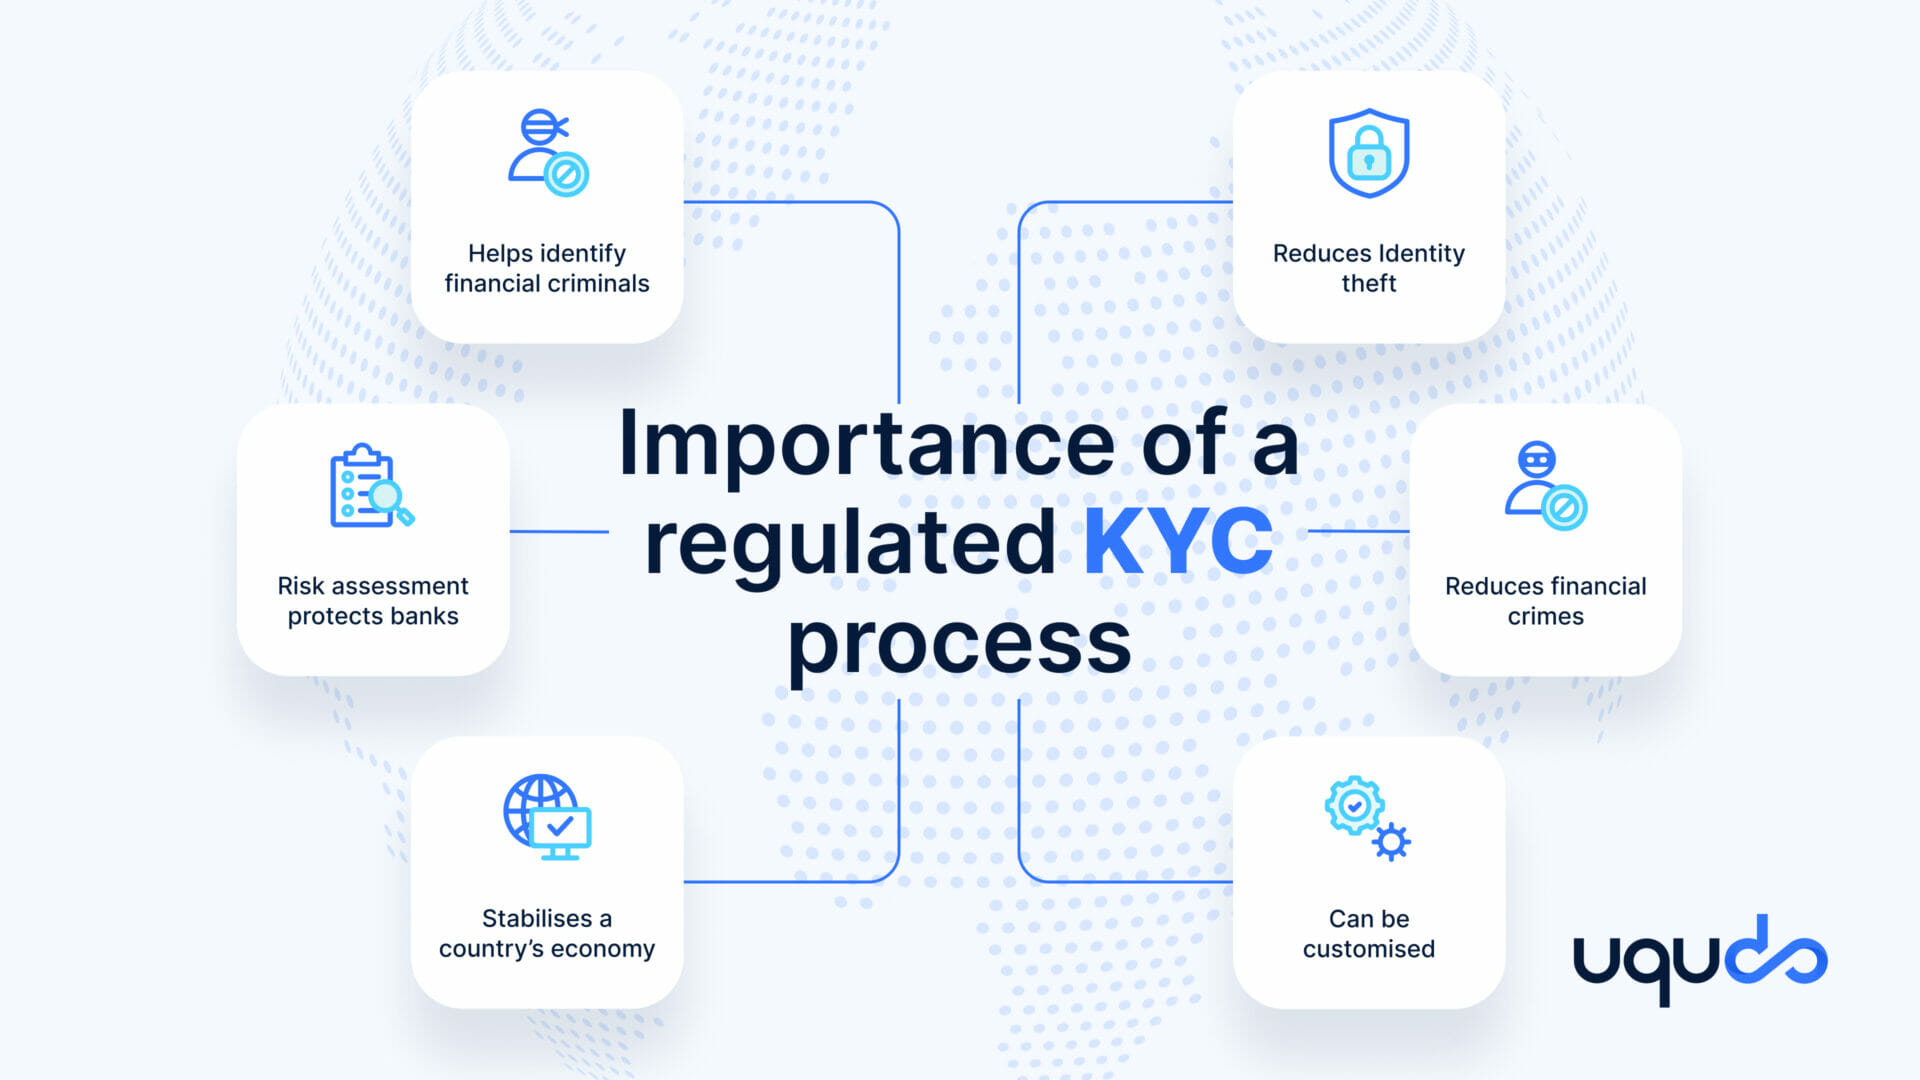 Importance of a regulated KYC process